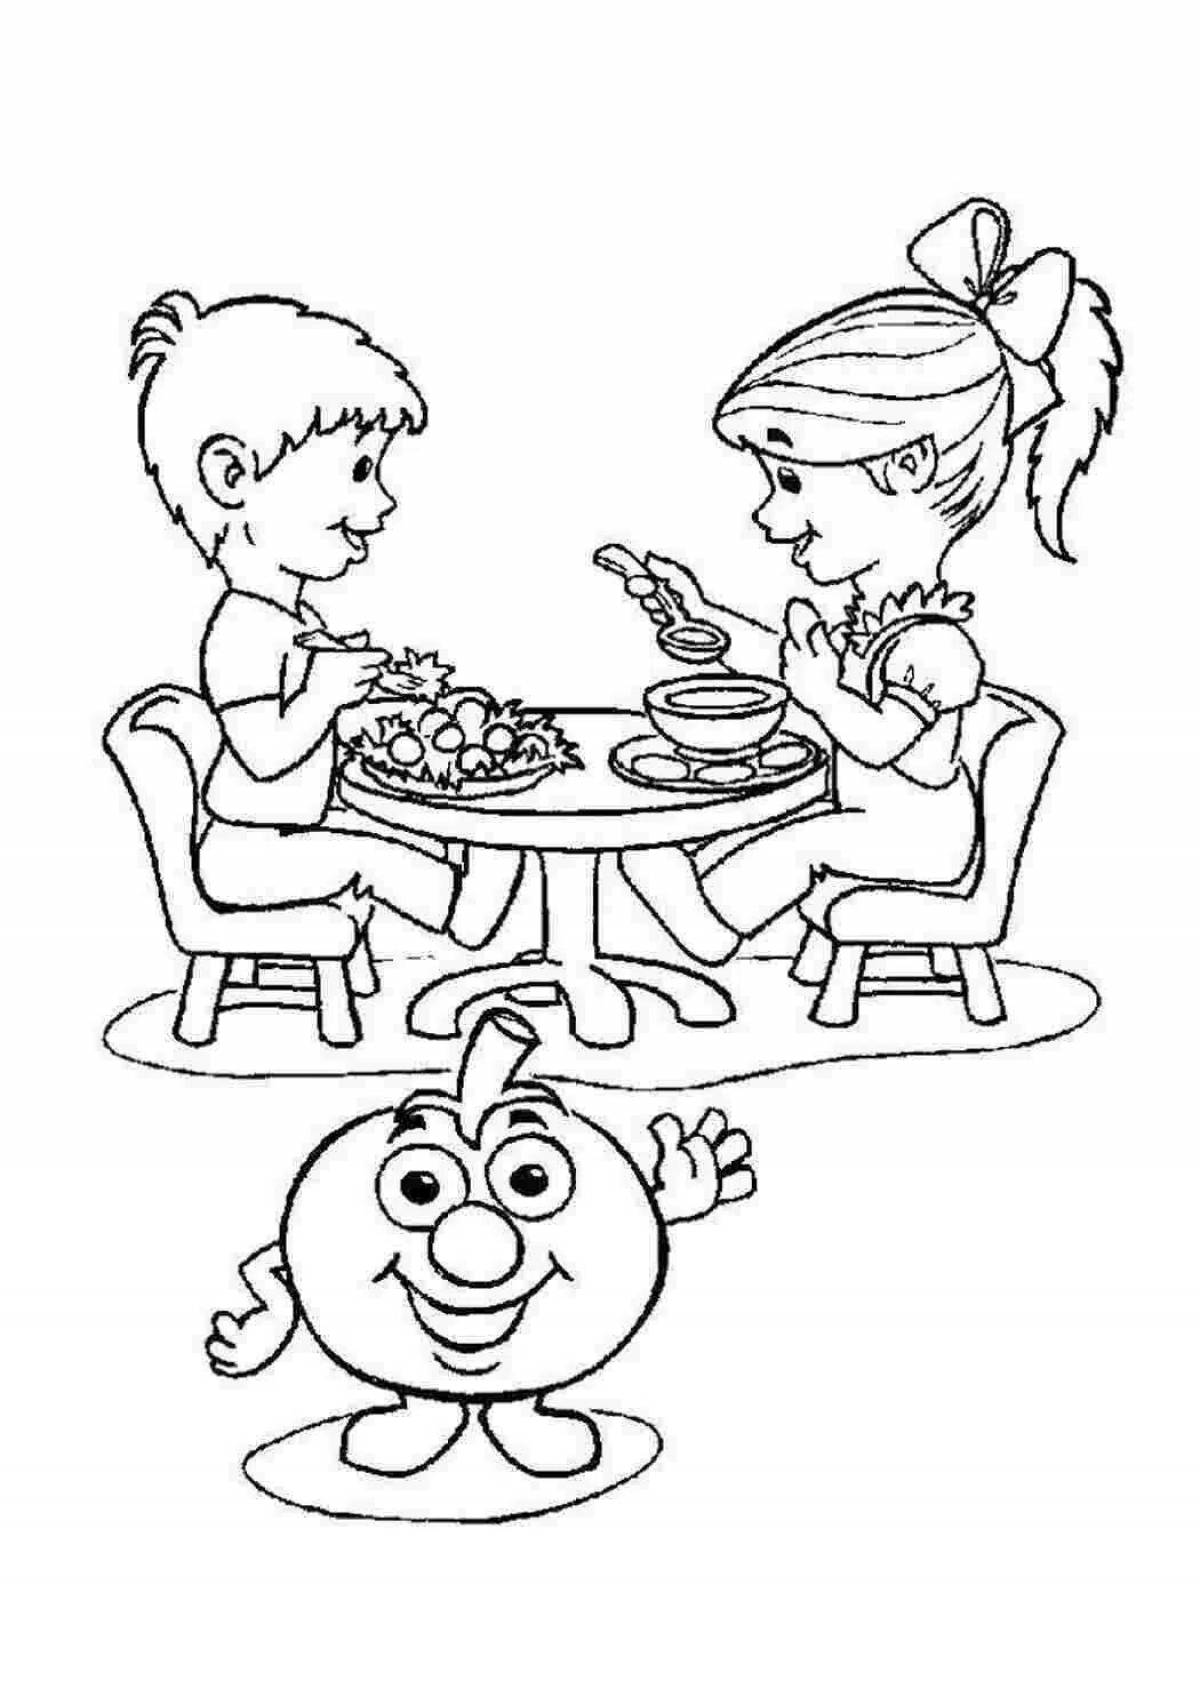 Coloring table manners